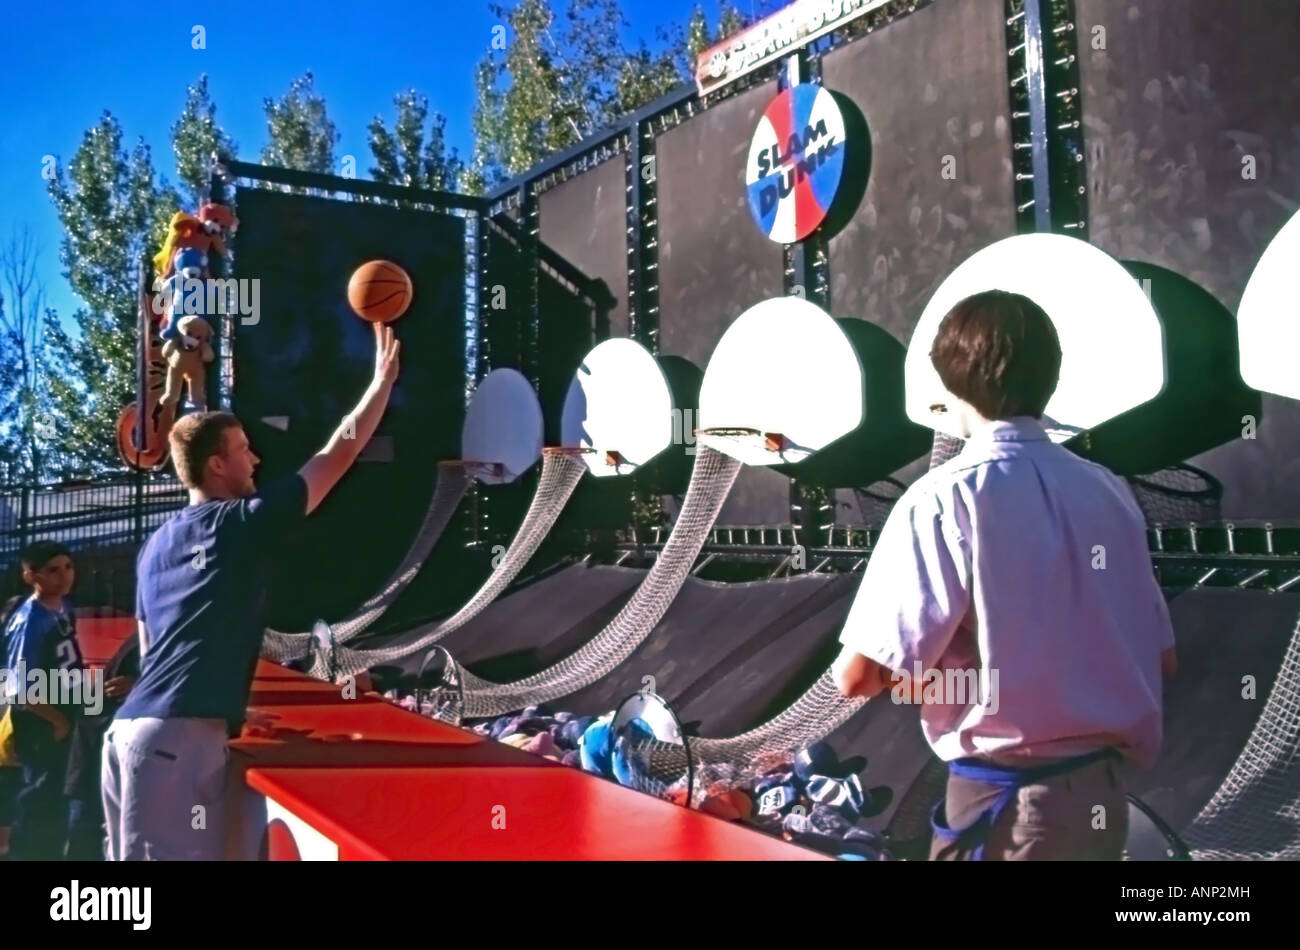 A young man skillfully shoots the basketball at an amusement park game  called Slam Dunk to win a prize at Lagoon in Utah, USA Stock Photo - Alamy